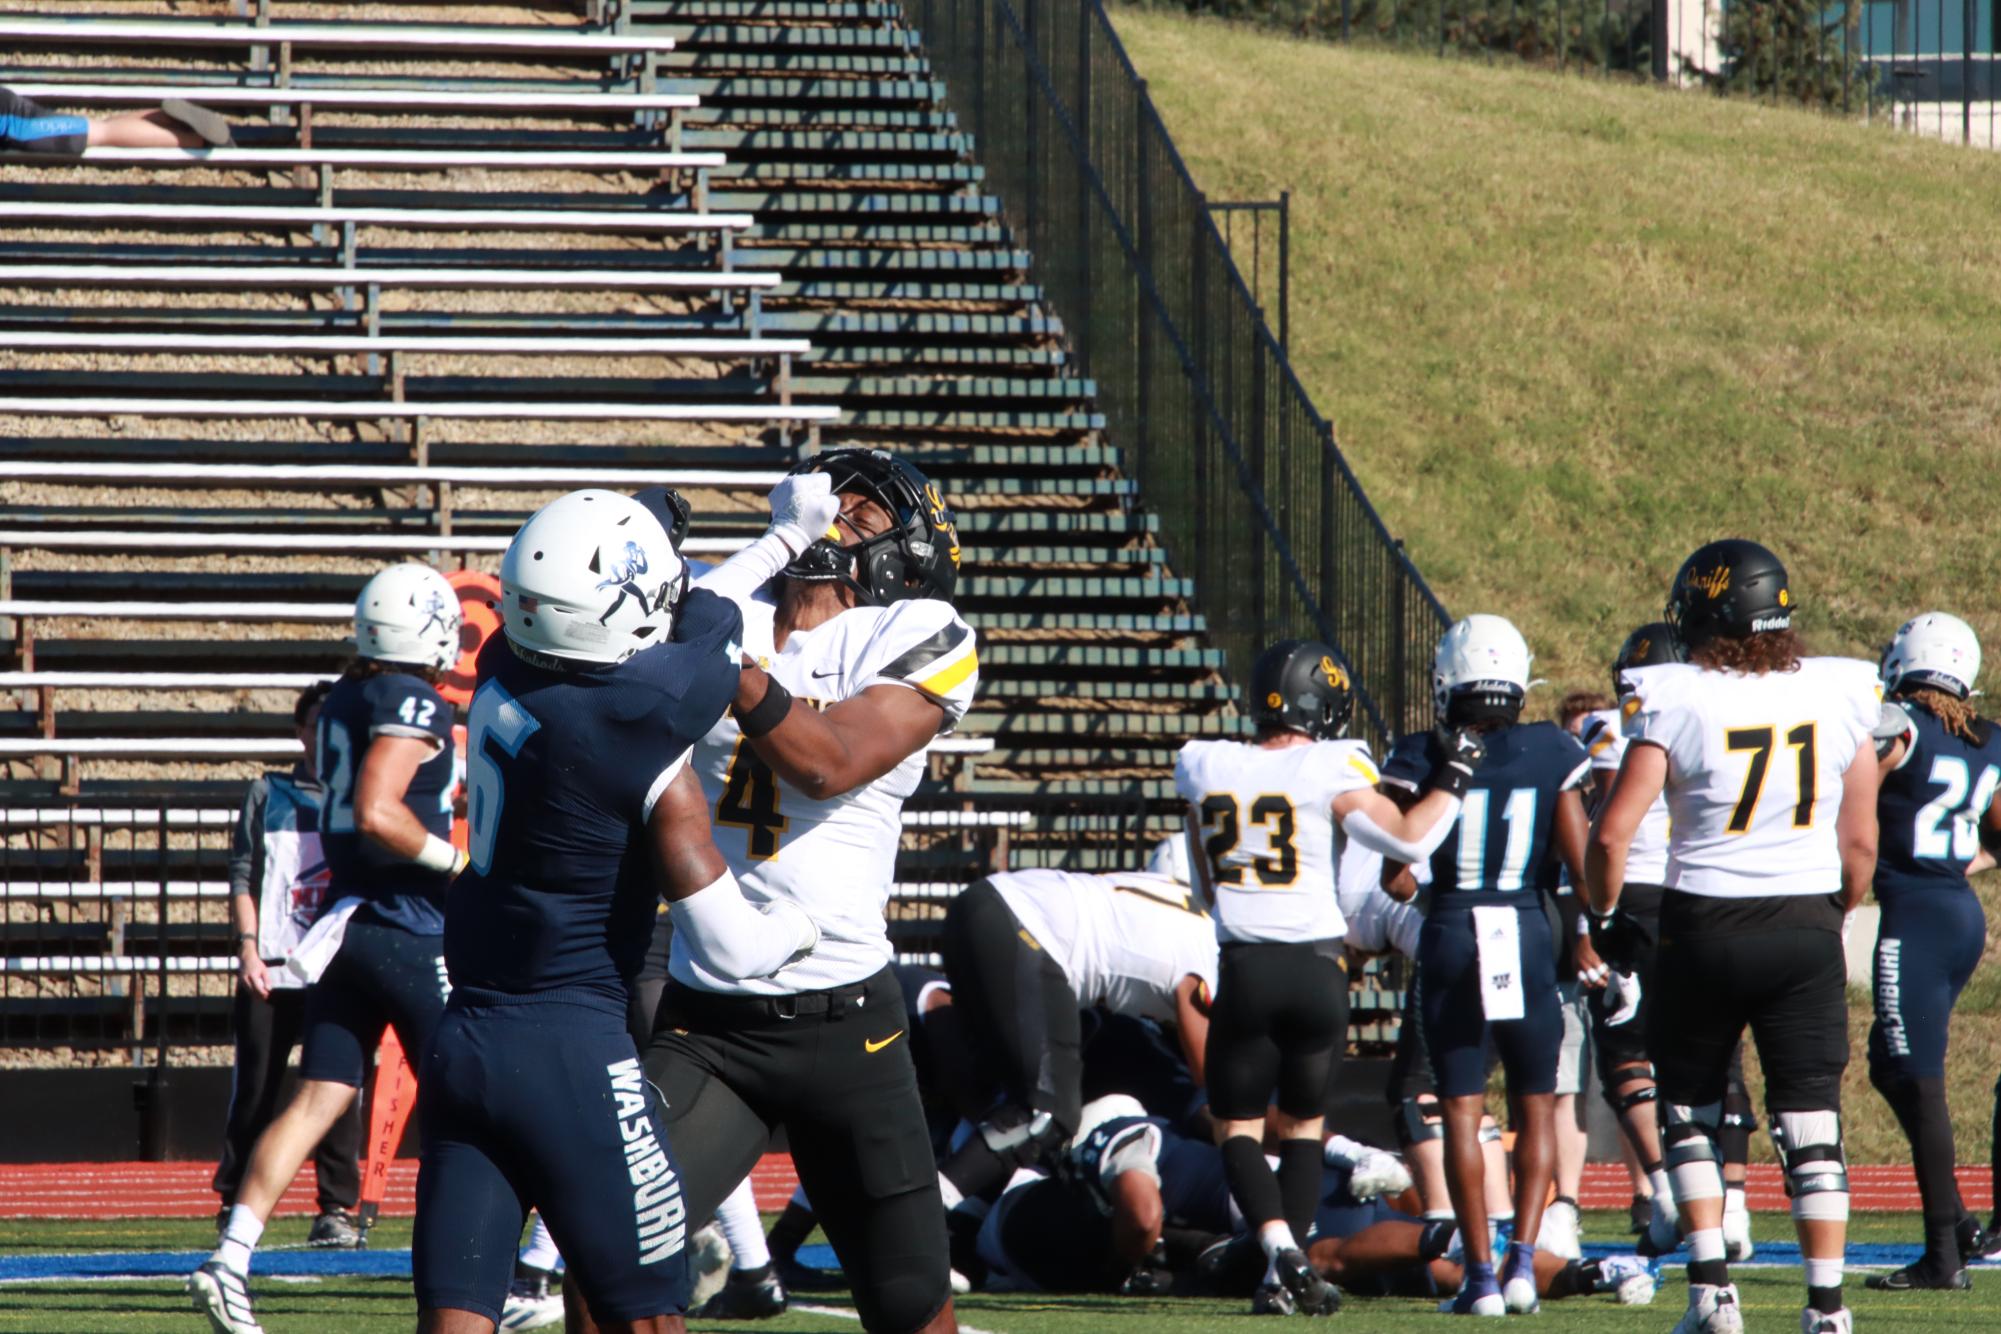 Sophomore defensive back, Braylon Alexander, executes a penalty of a face mask against a Missouri Western player. The penalty was not called against the Ichabods. 
